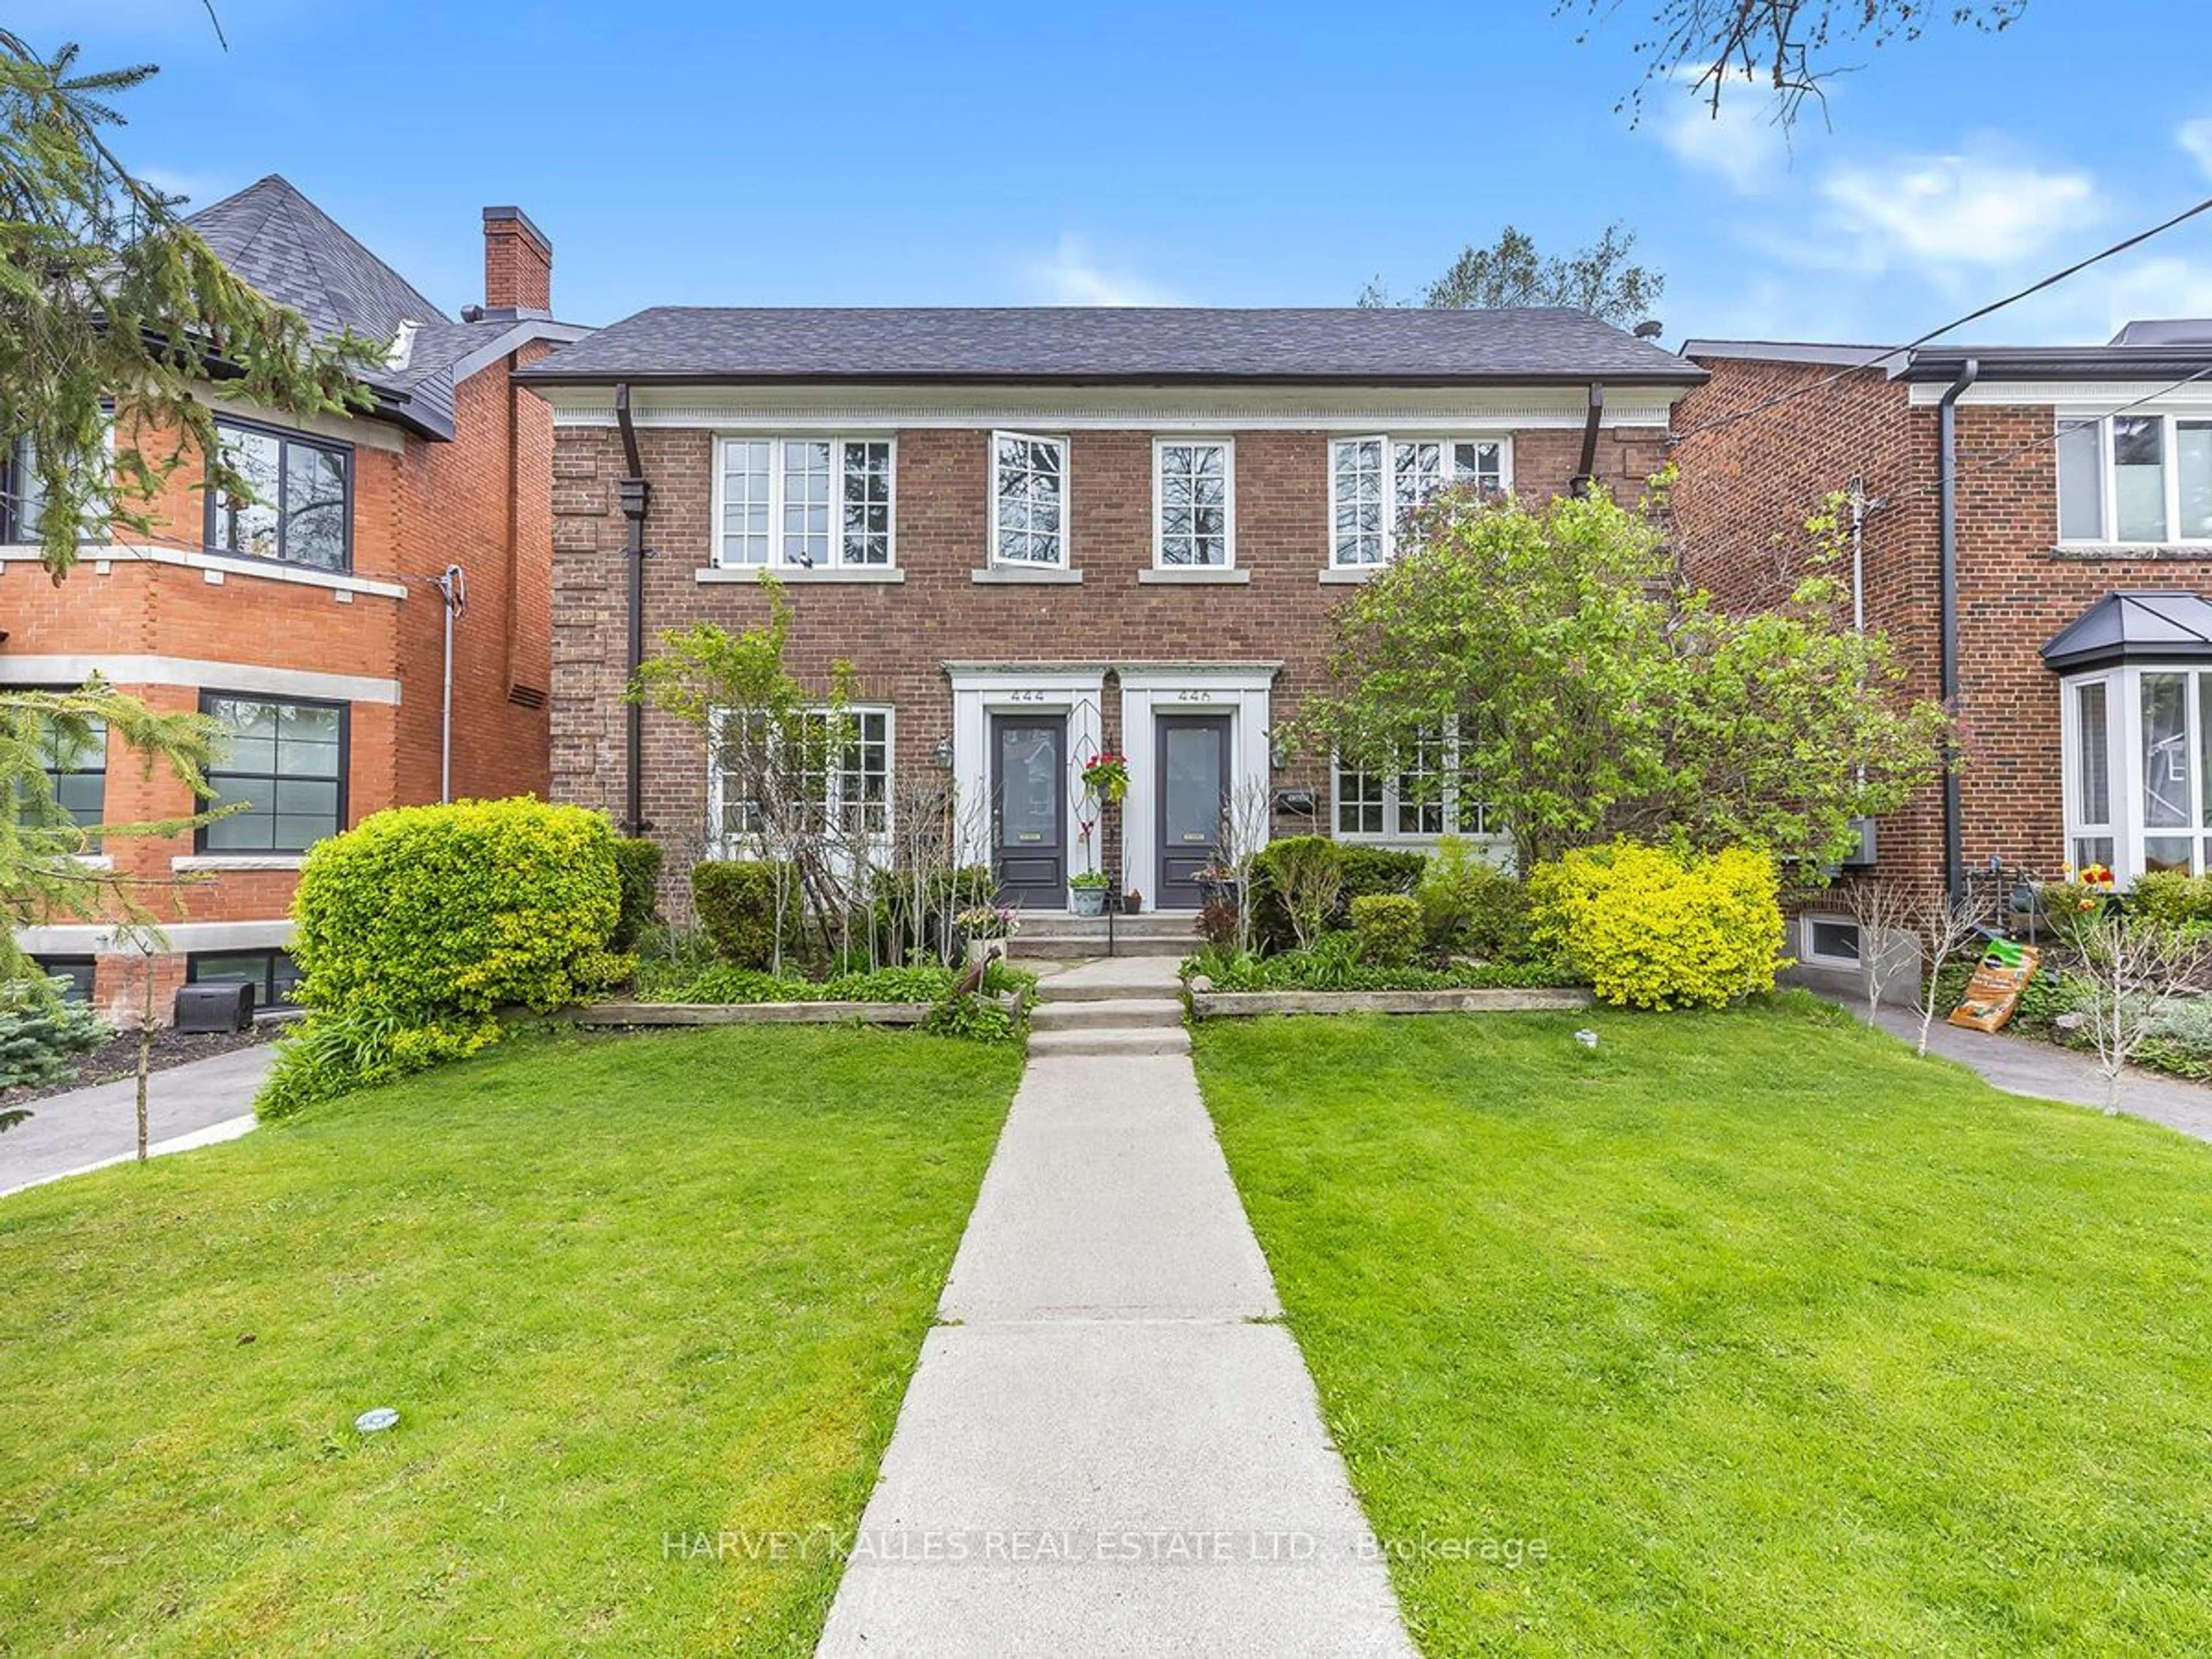 Home with brick exterior material for 444 Merton St, Toronto Ontario M4S 1B3